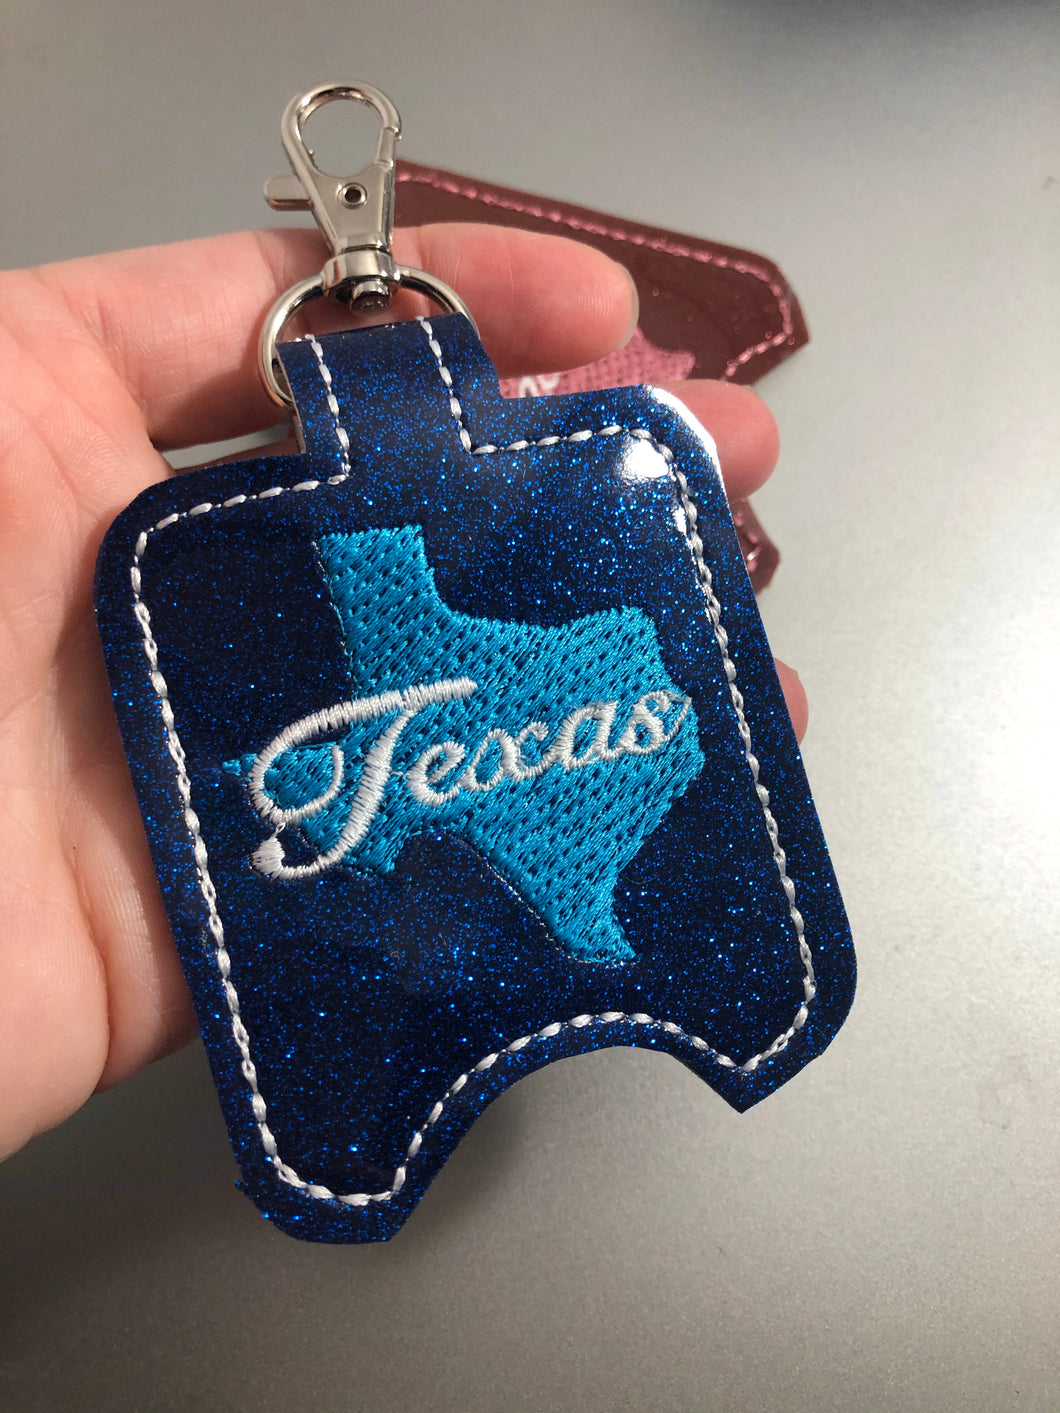 Texas Hand Sanitizer Holder Snap Tab Version In the Hoop Embroidery Project 1 oz BBW for 5x7 hoops